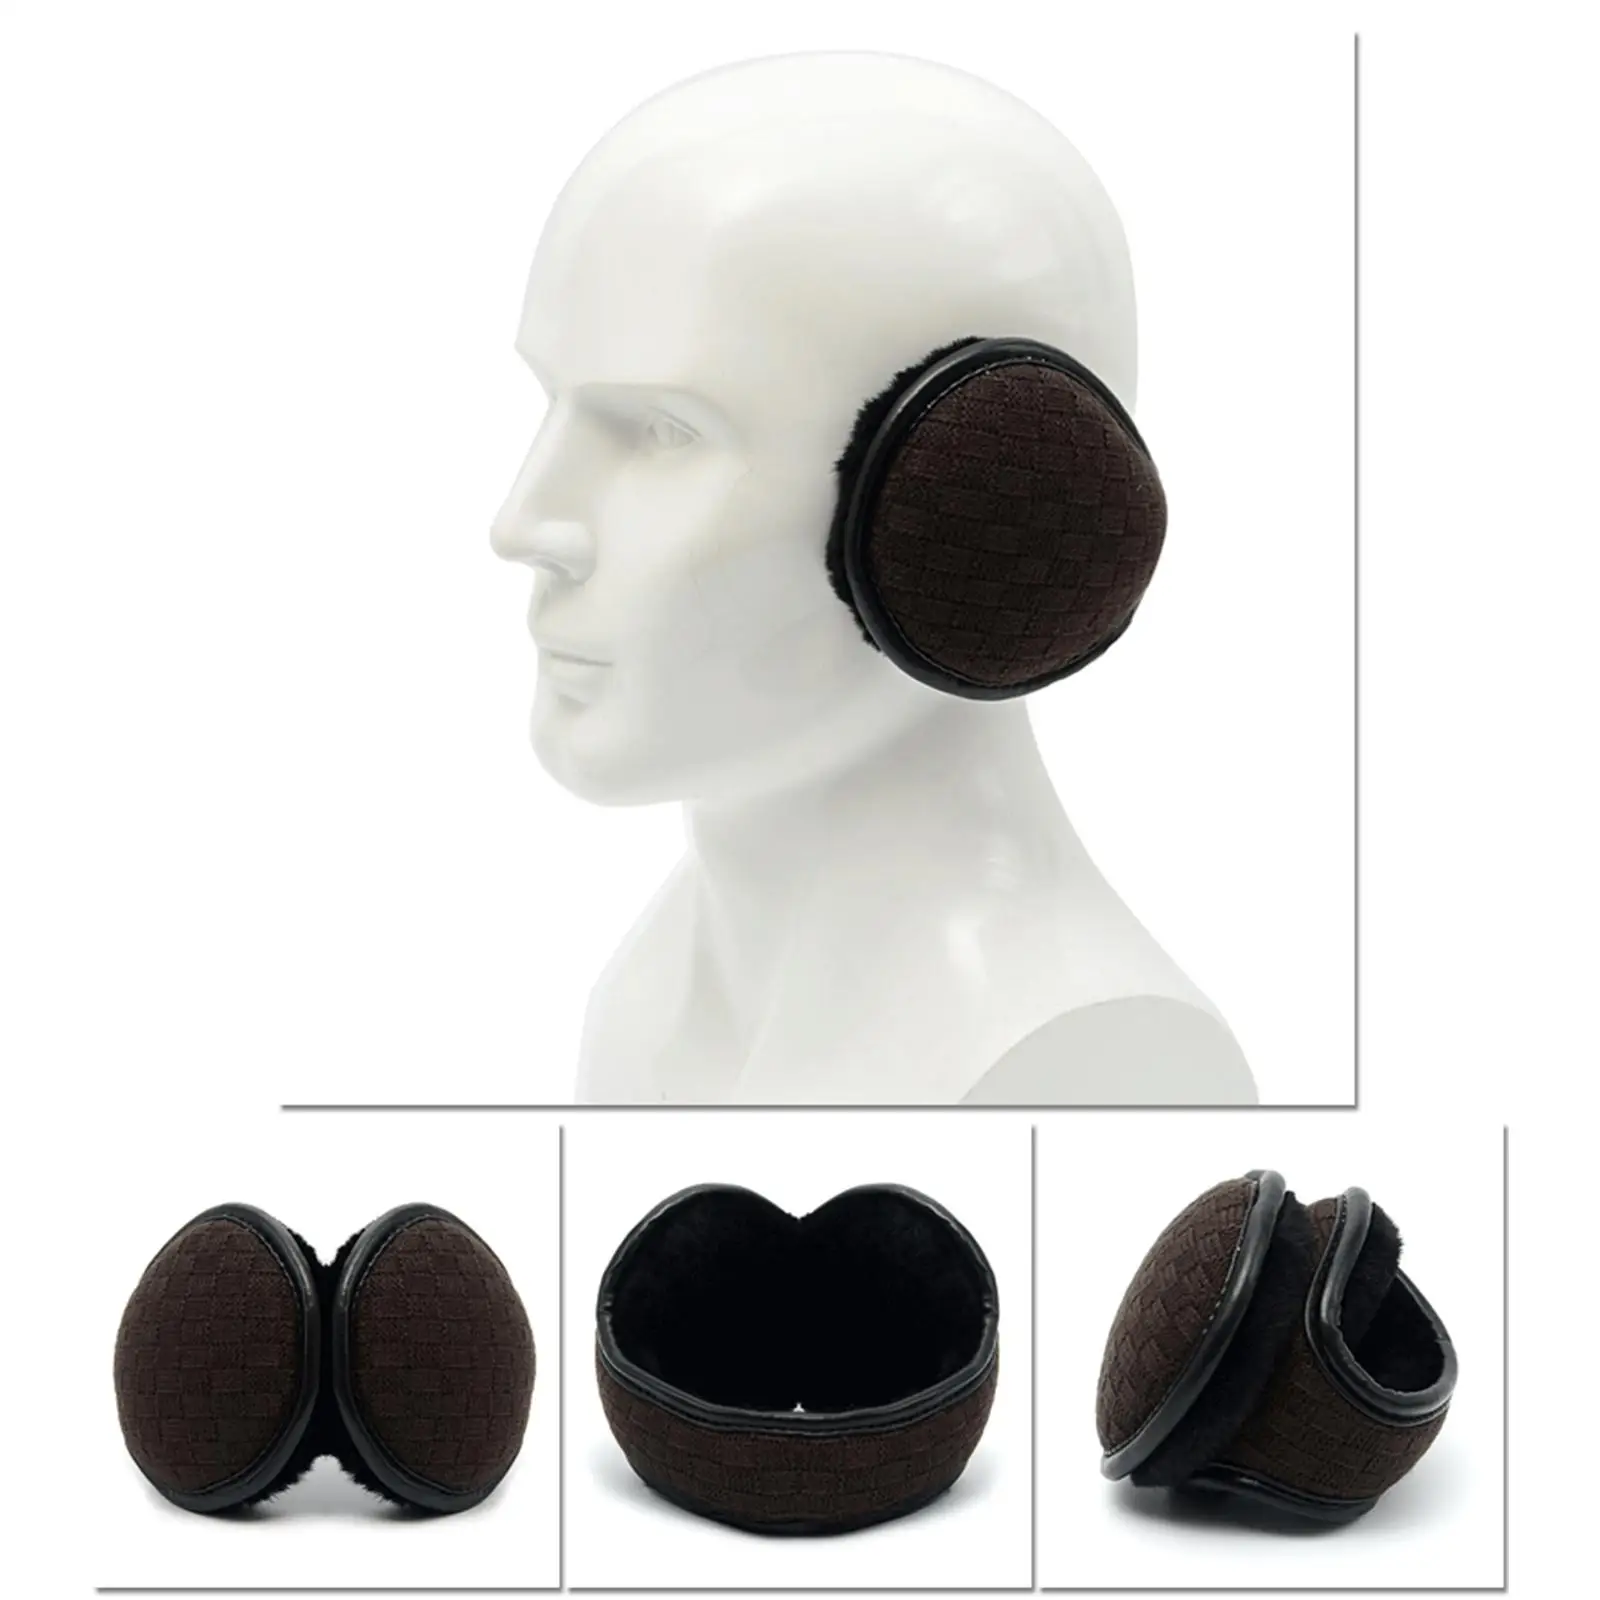 

Ear Warmers Foldable Portable Soft Earmuffs Ear Covers Winter Ear Muffs for Skiing Traveling Skating Outdoor Activities Biking